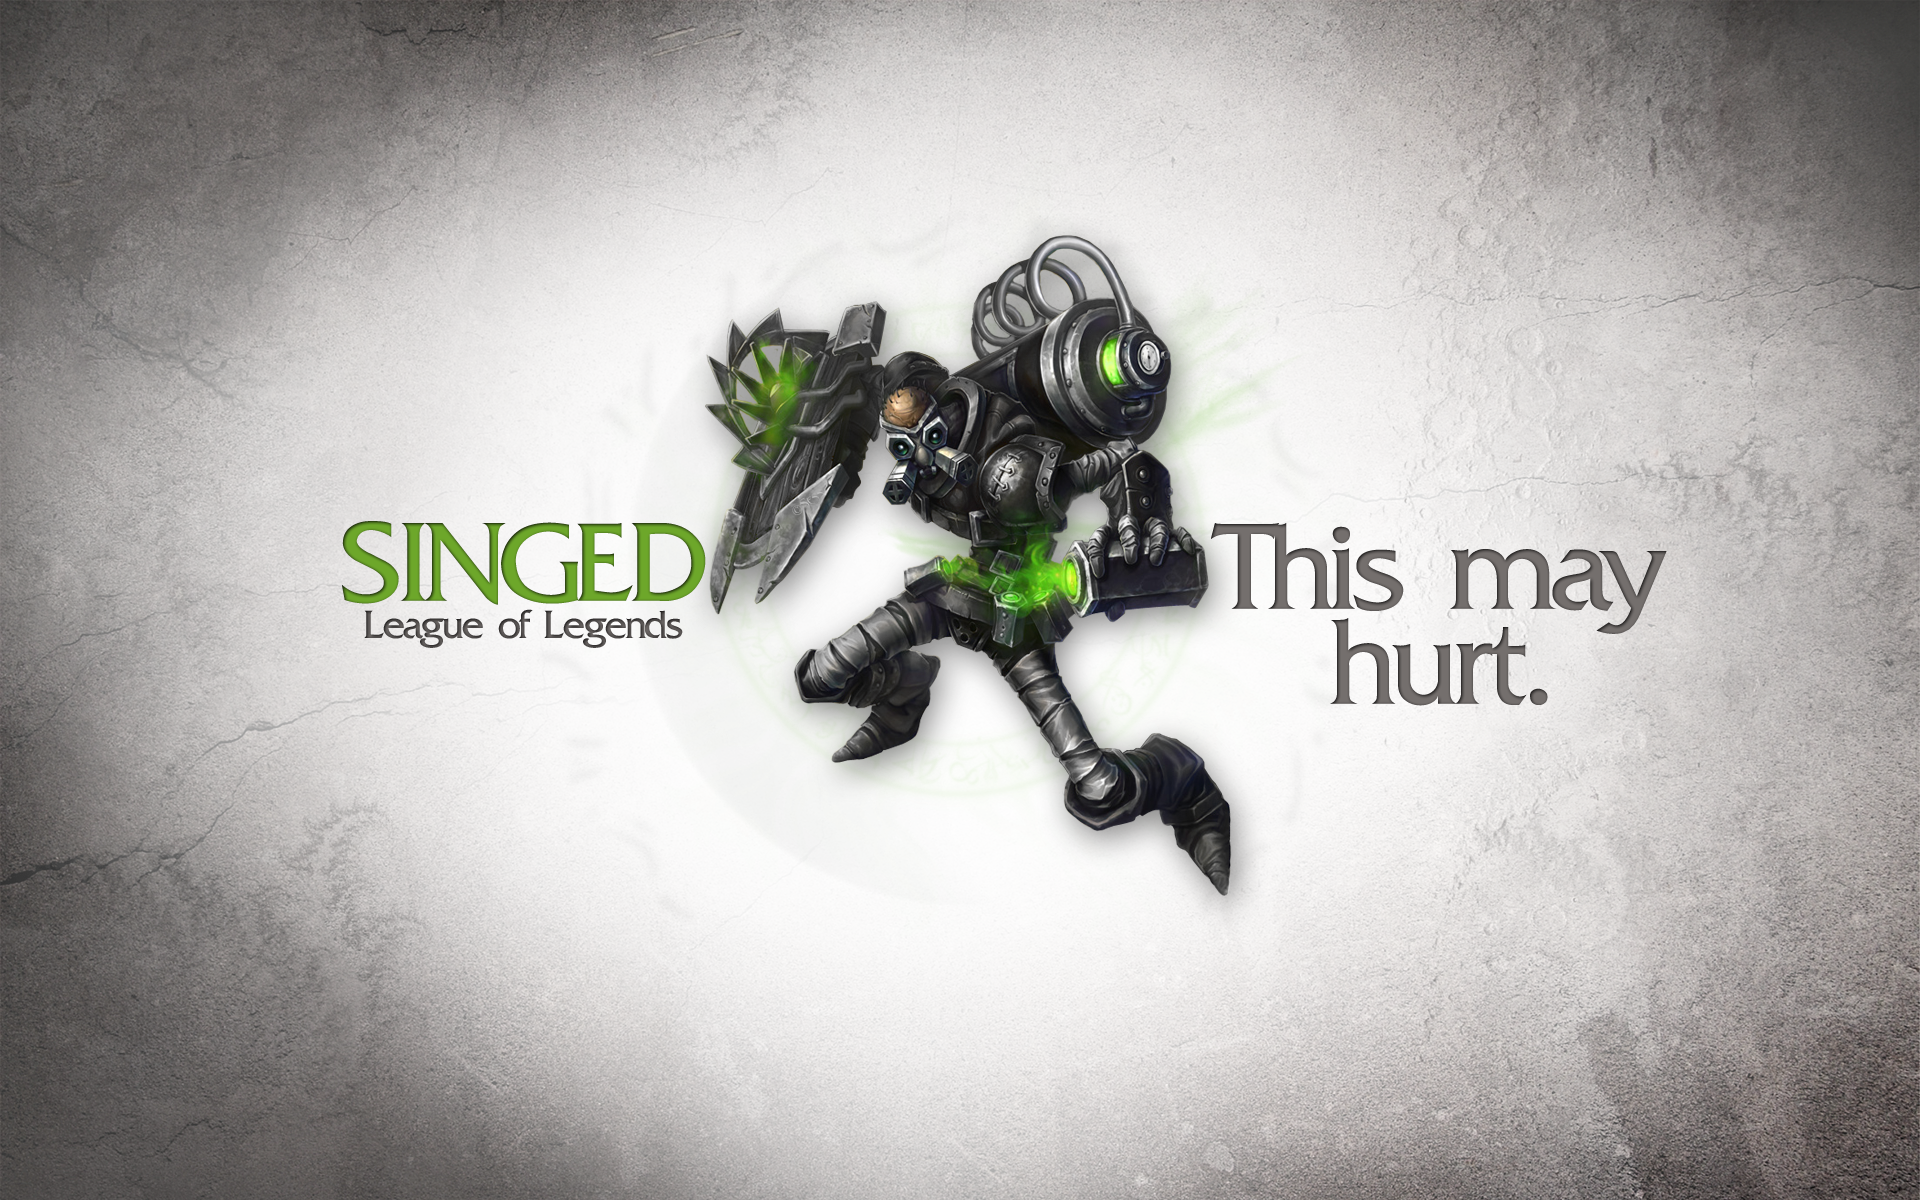 General 1920x1200 League of Legends PC gaming Singed (League of Legends) video game art simple background text digital art